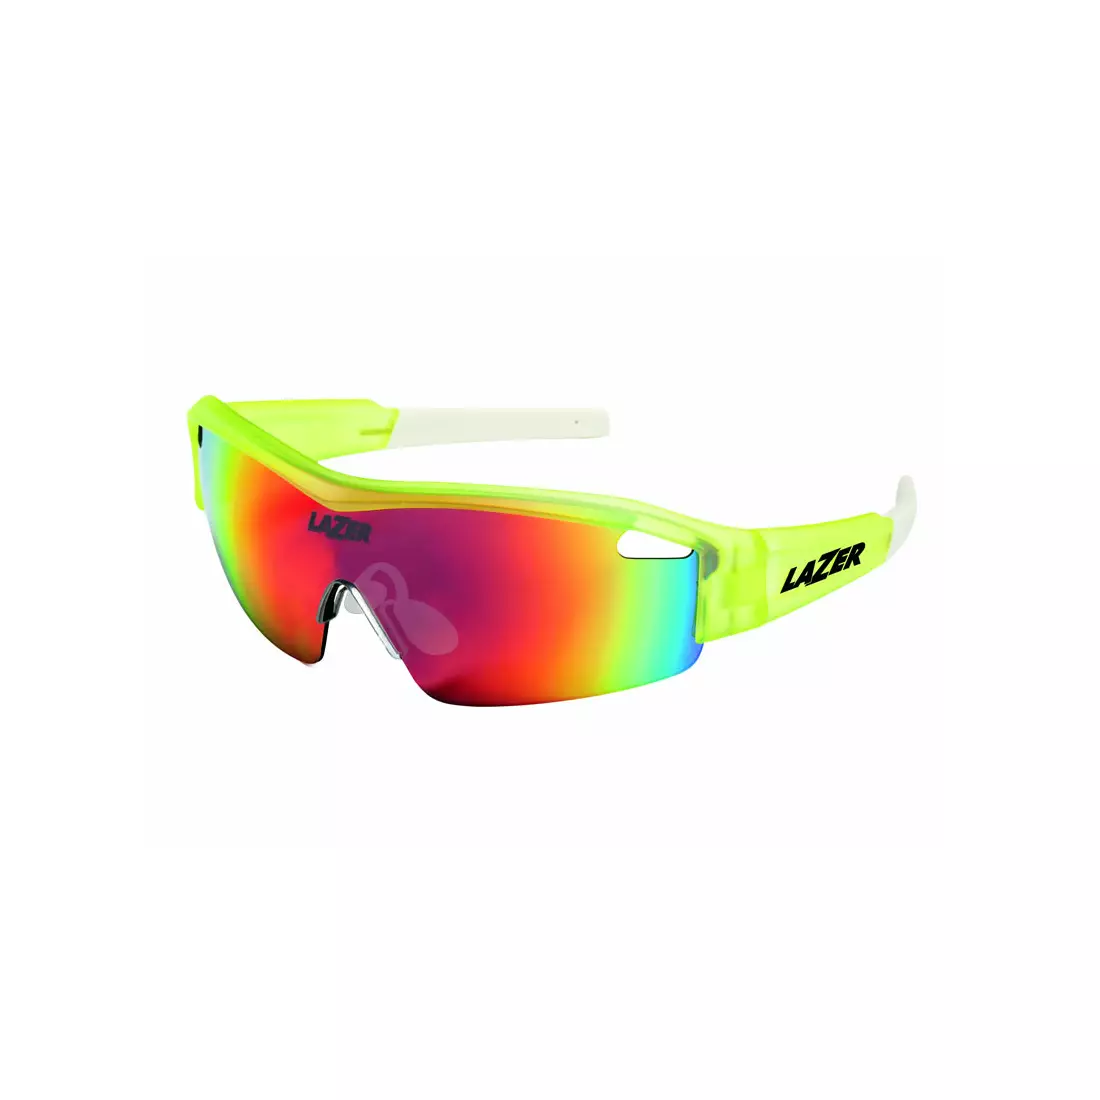 LAZER SOLID STATE1 Flash Yellow-Brille (Smoke-Black Red REVO. Yellow-Blue Mirror. Clear) LZR-OKL-SOLD-FLYELL